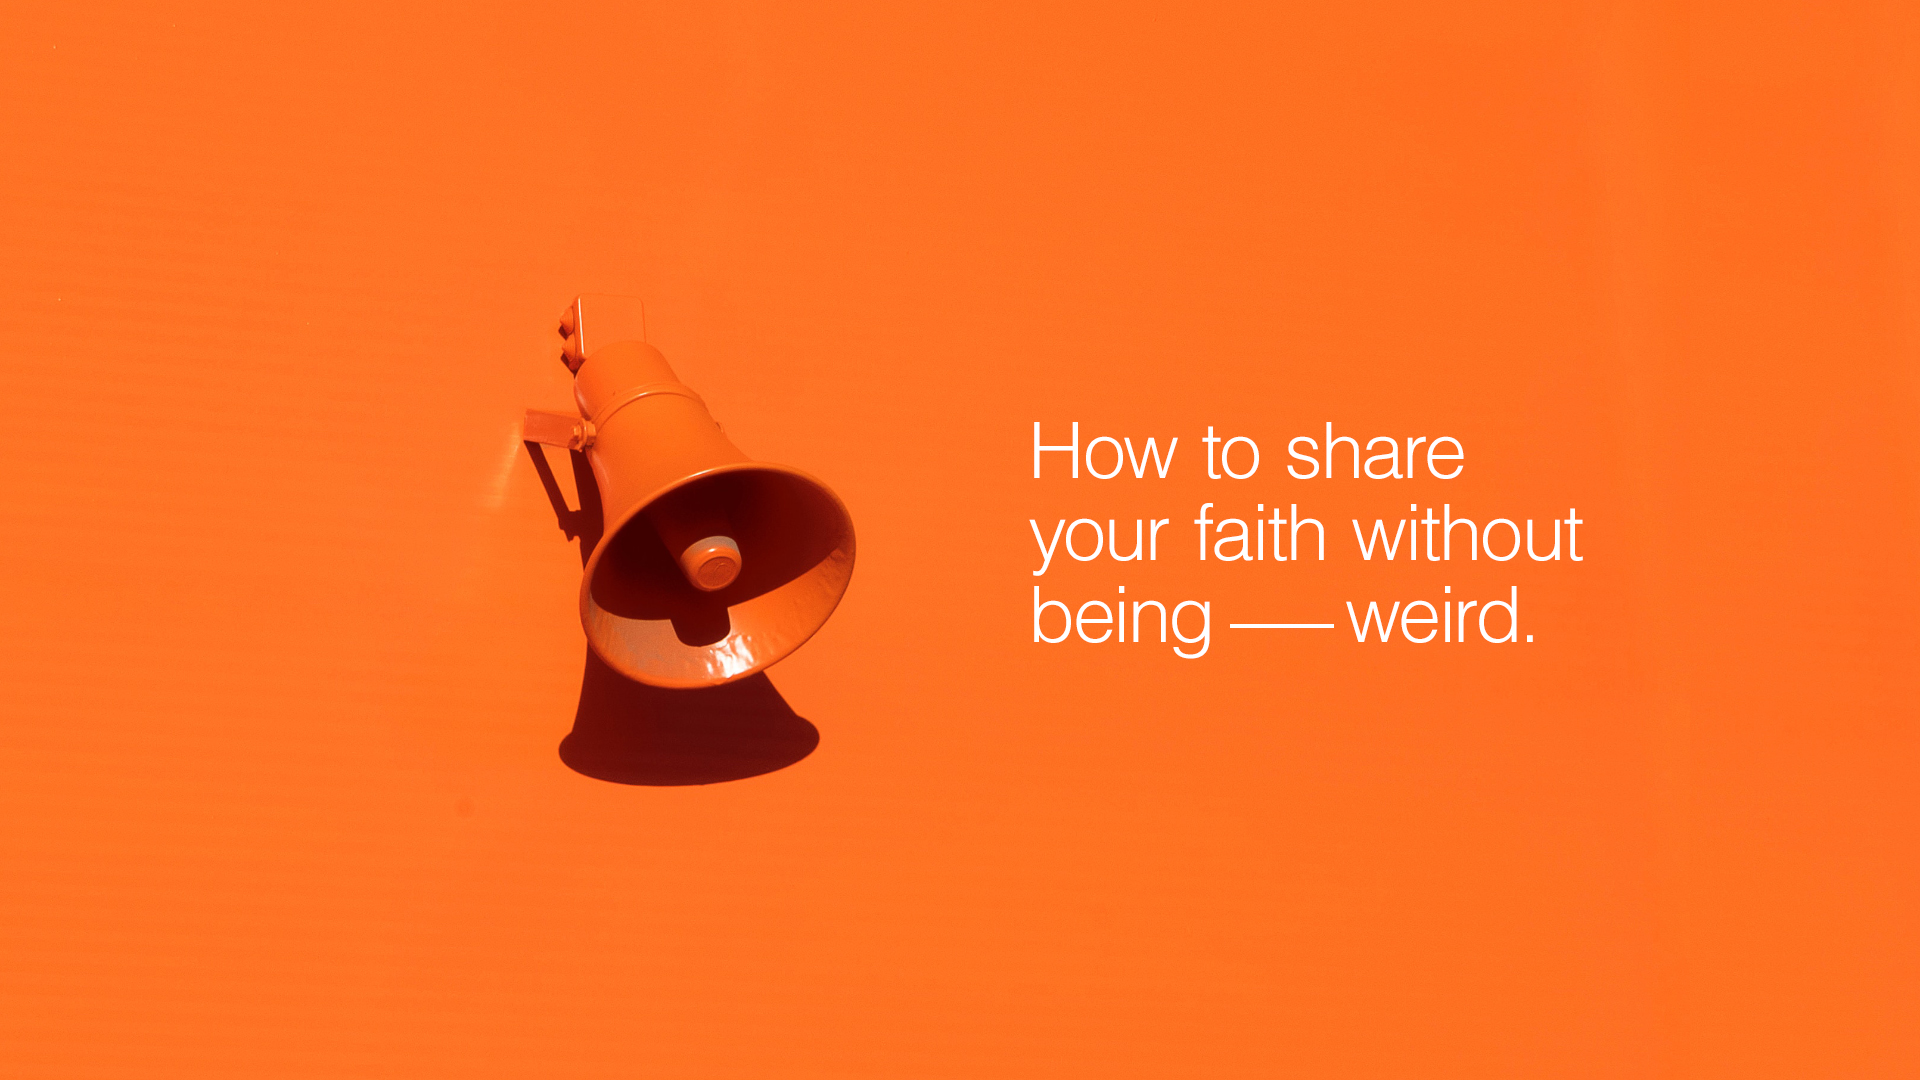 How To Share Your Faith Without Being Weird